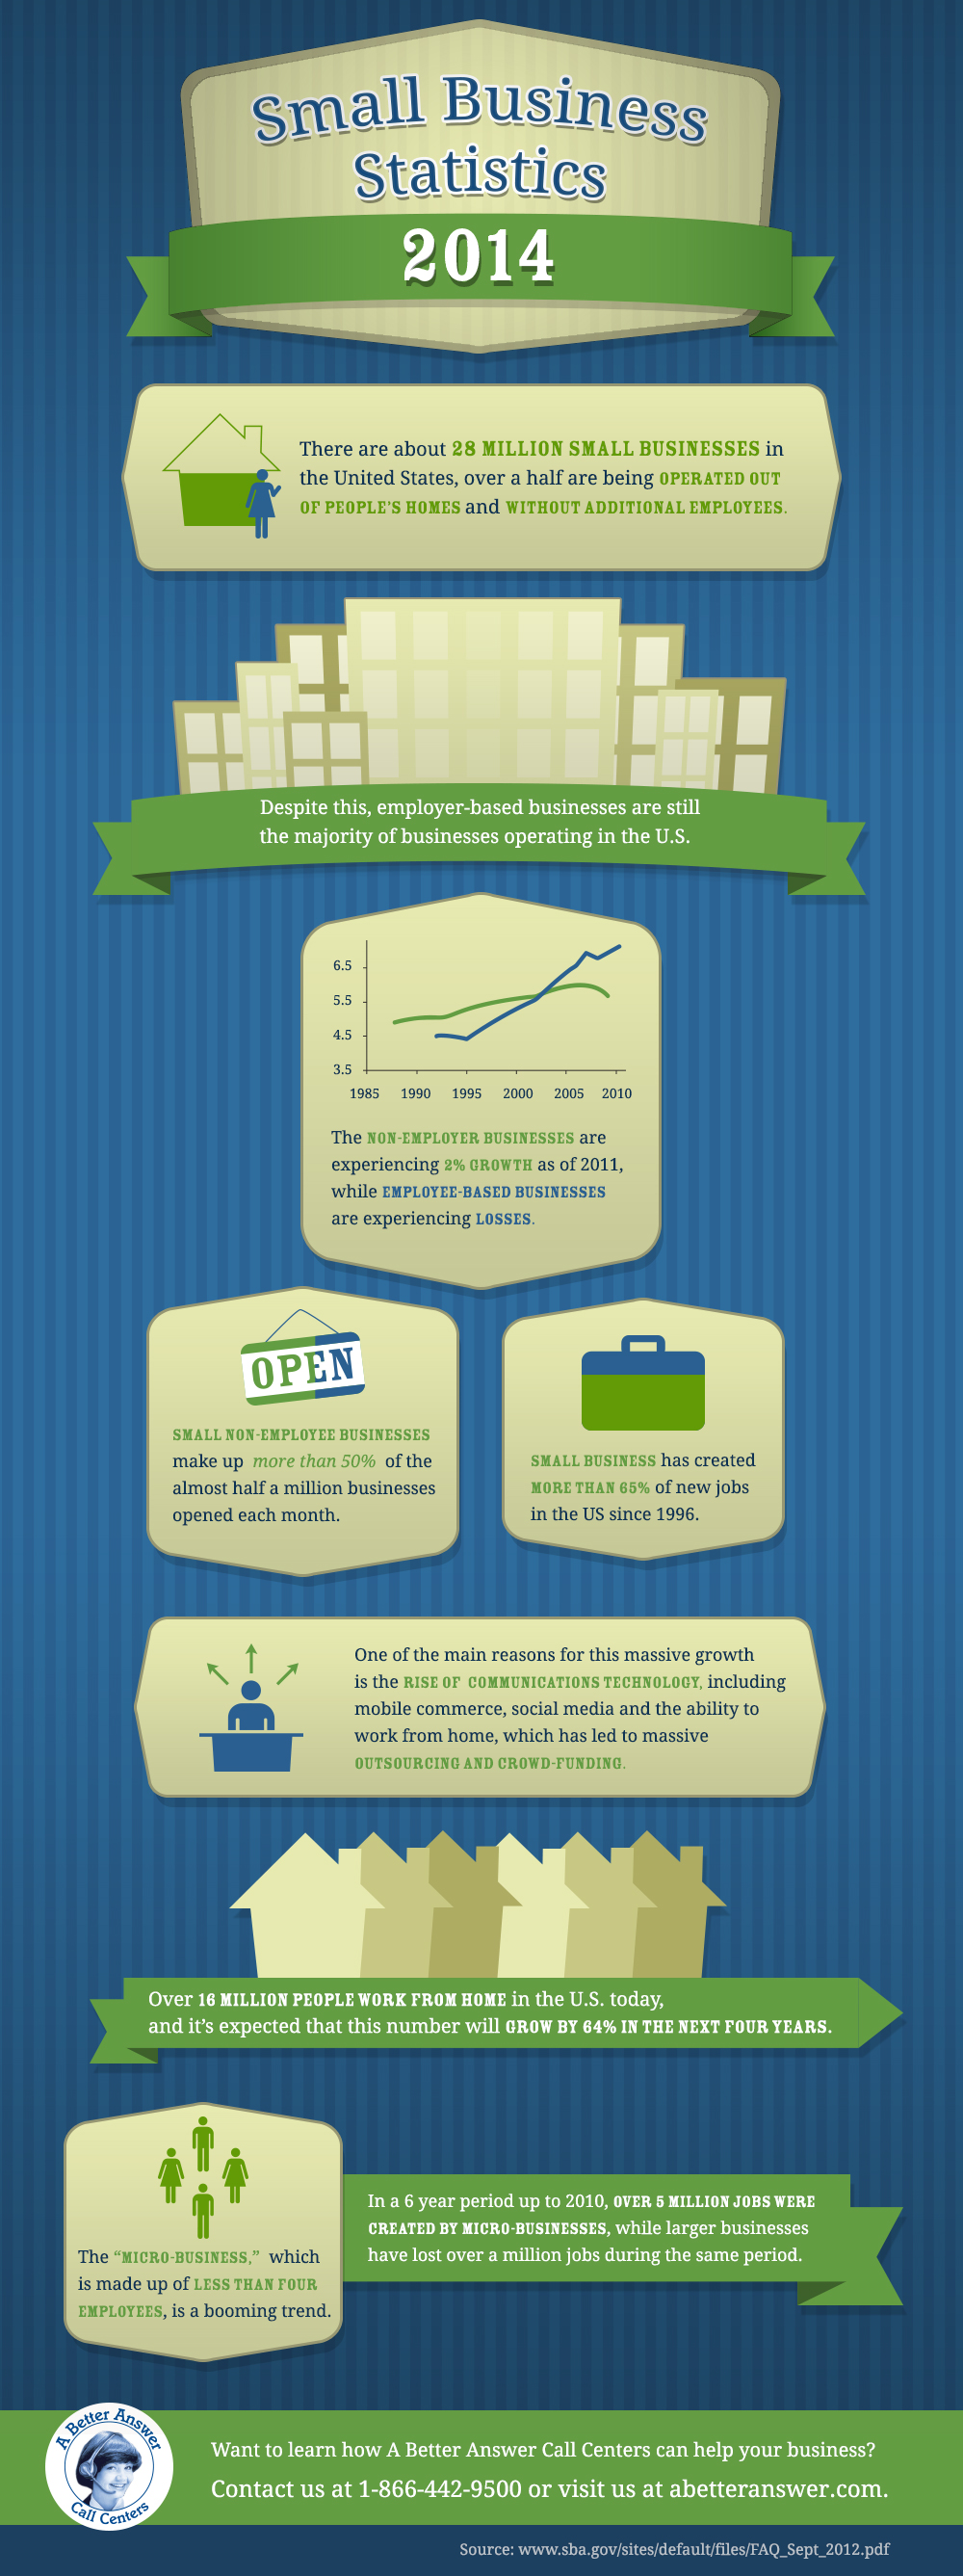 Small Business Statistics of 2014